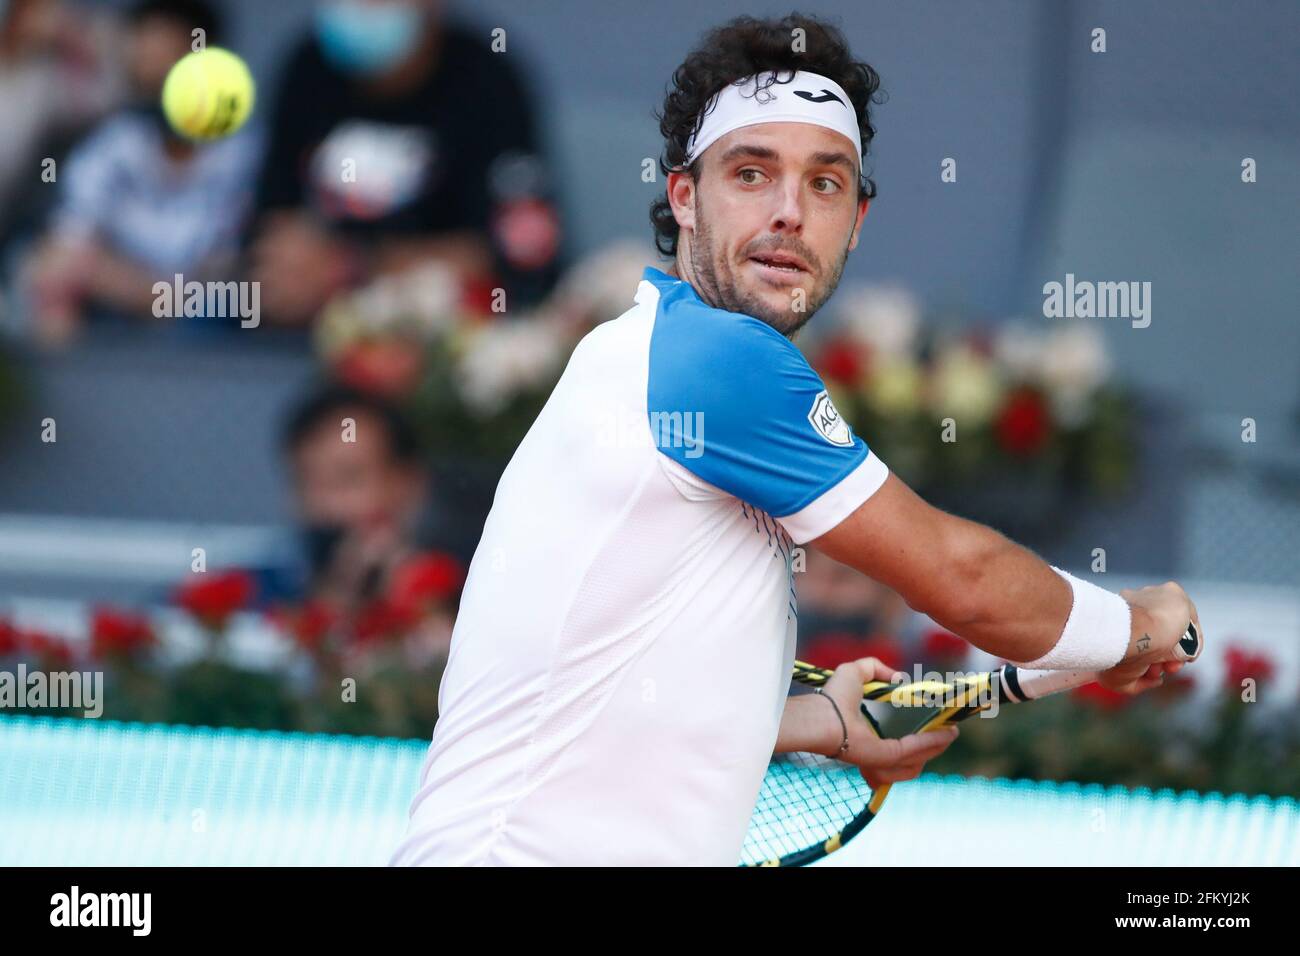 Madrid, Spain. 04th May, 2021. Marco Cecchinato of Italy in action during  his Men's Singles match, round of 64, against Roberto Bautista Agut of  Spain on the Mutua Madrid Open 2021, Masters